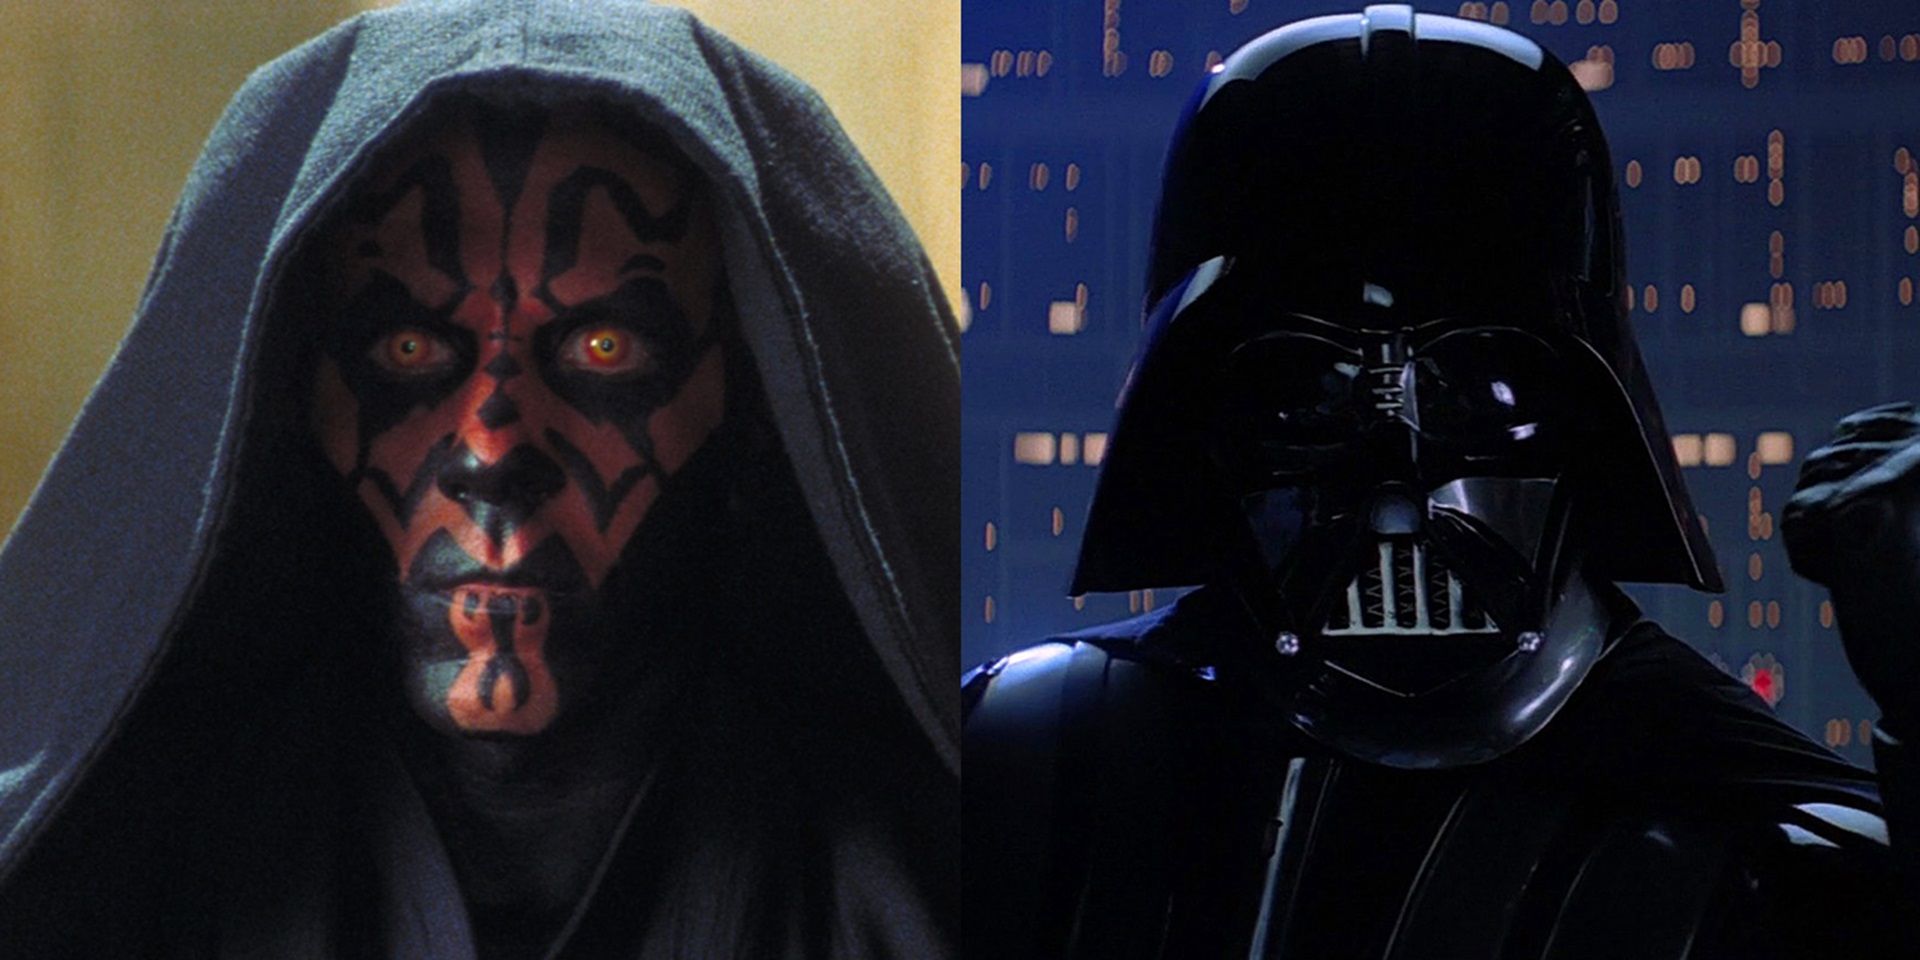 Darth Maul in The Phantom Menace and Darth Vader in The Empire Strikes Back.